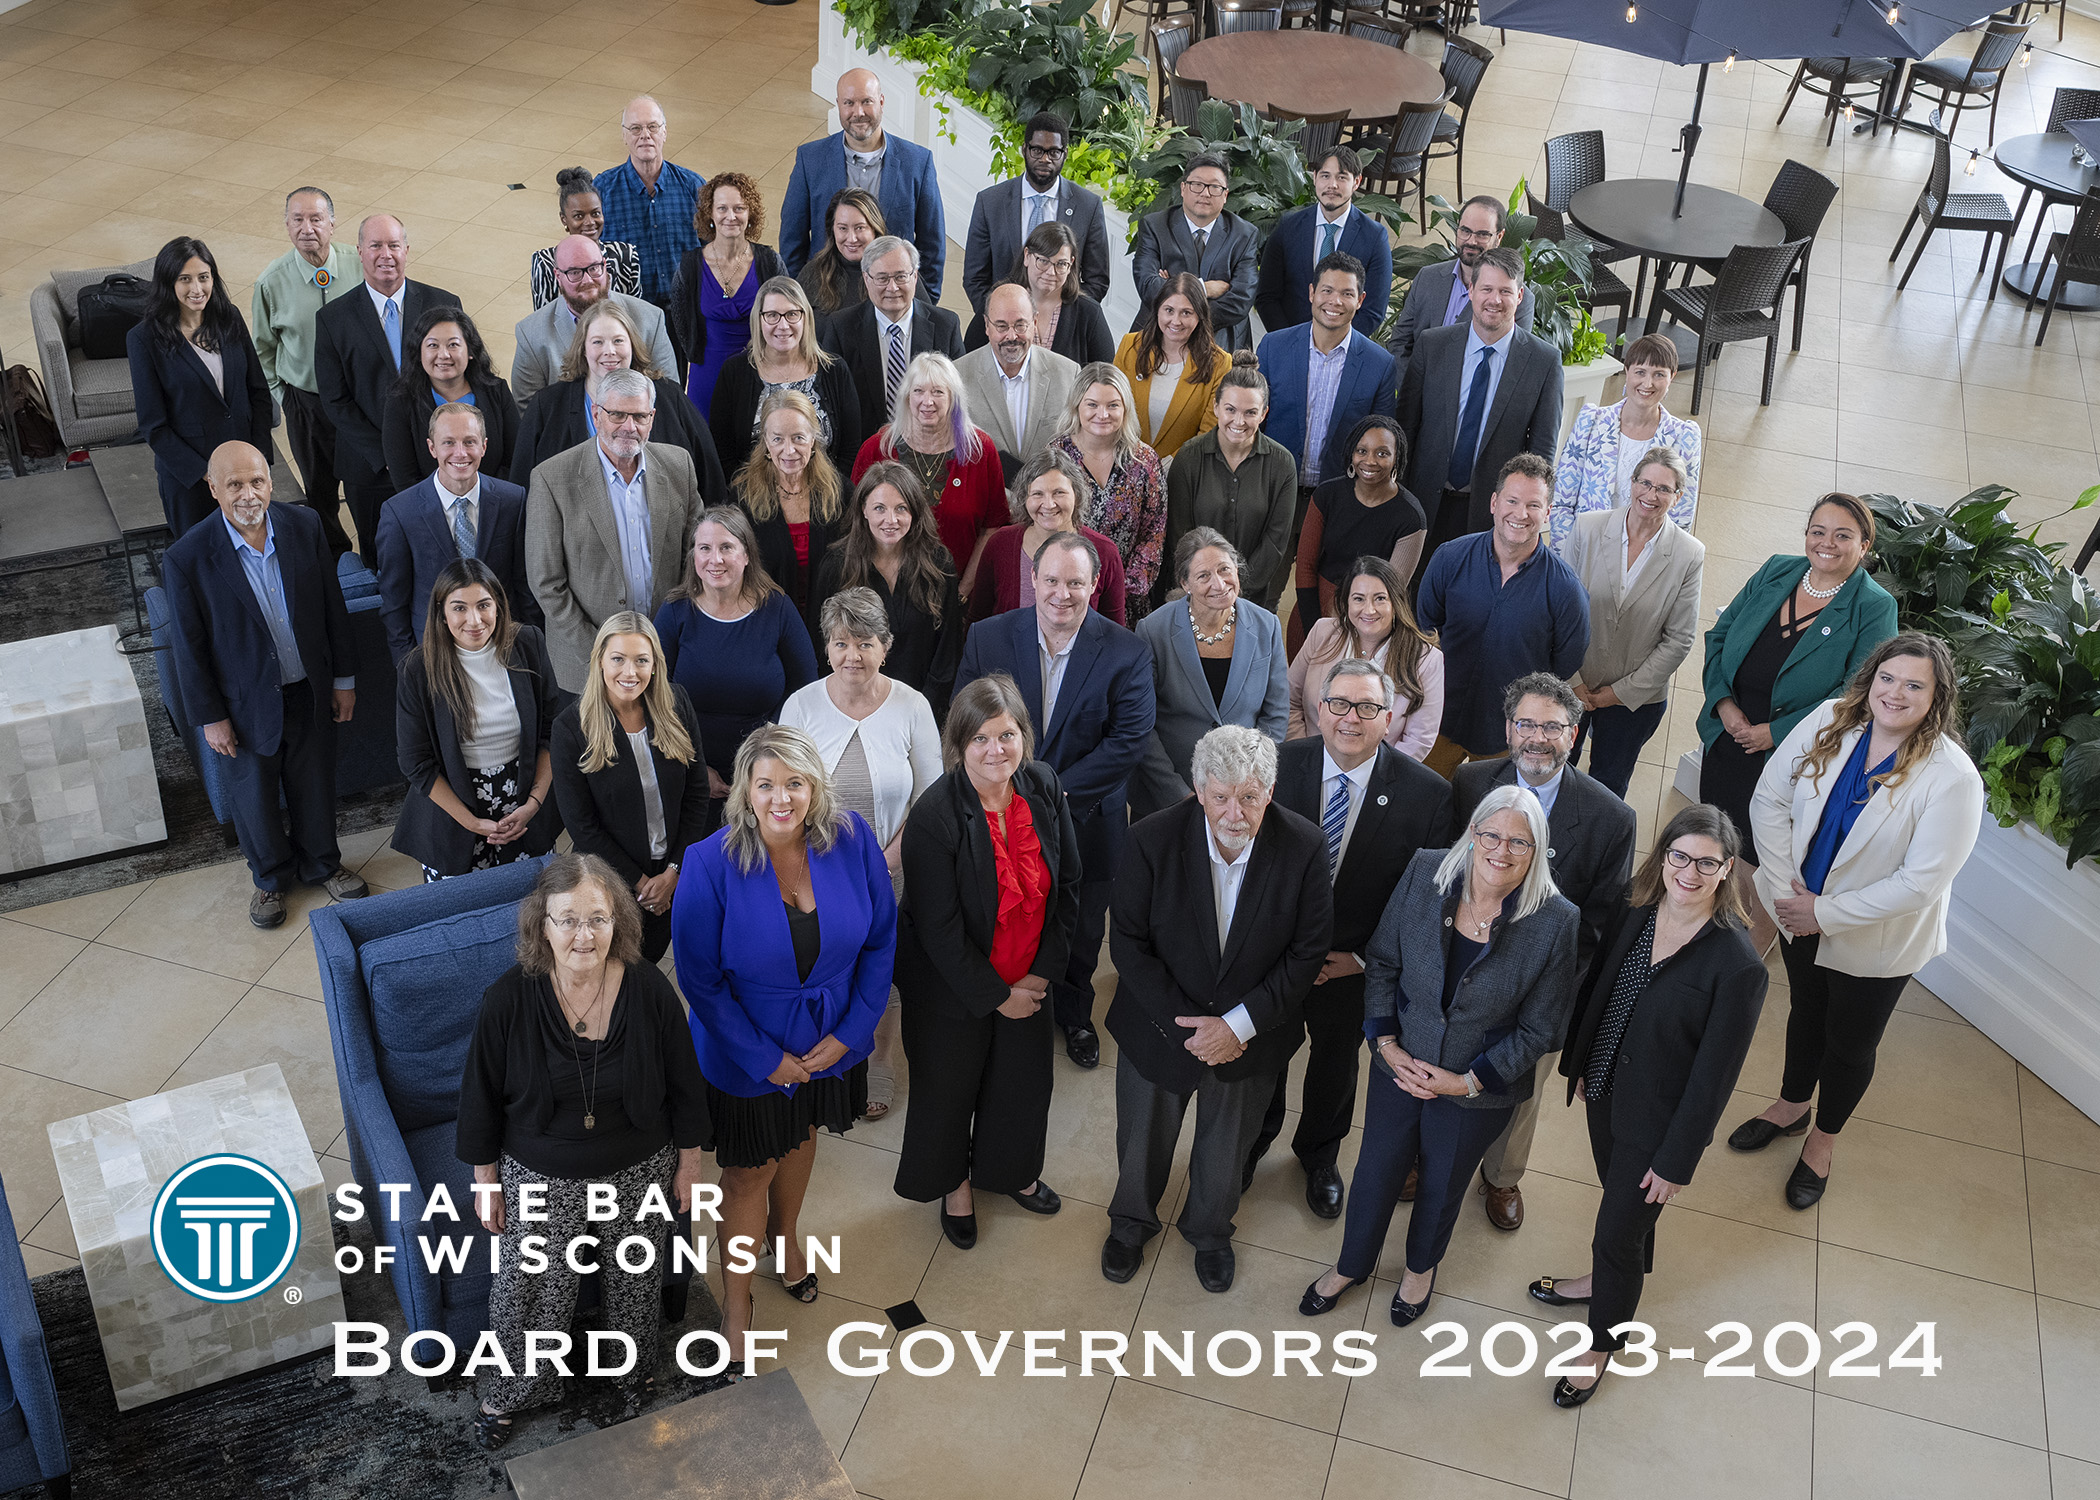 Board of Governors 2023-2024 - a large group of people smiling at the camera in an outdoor setting